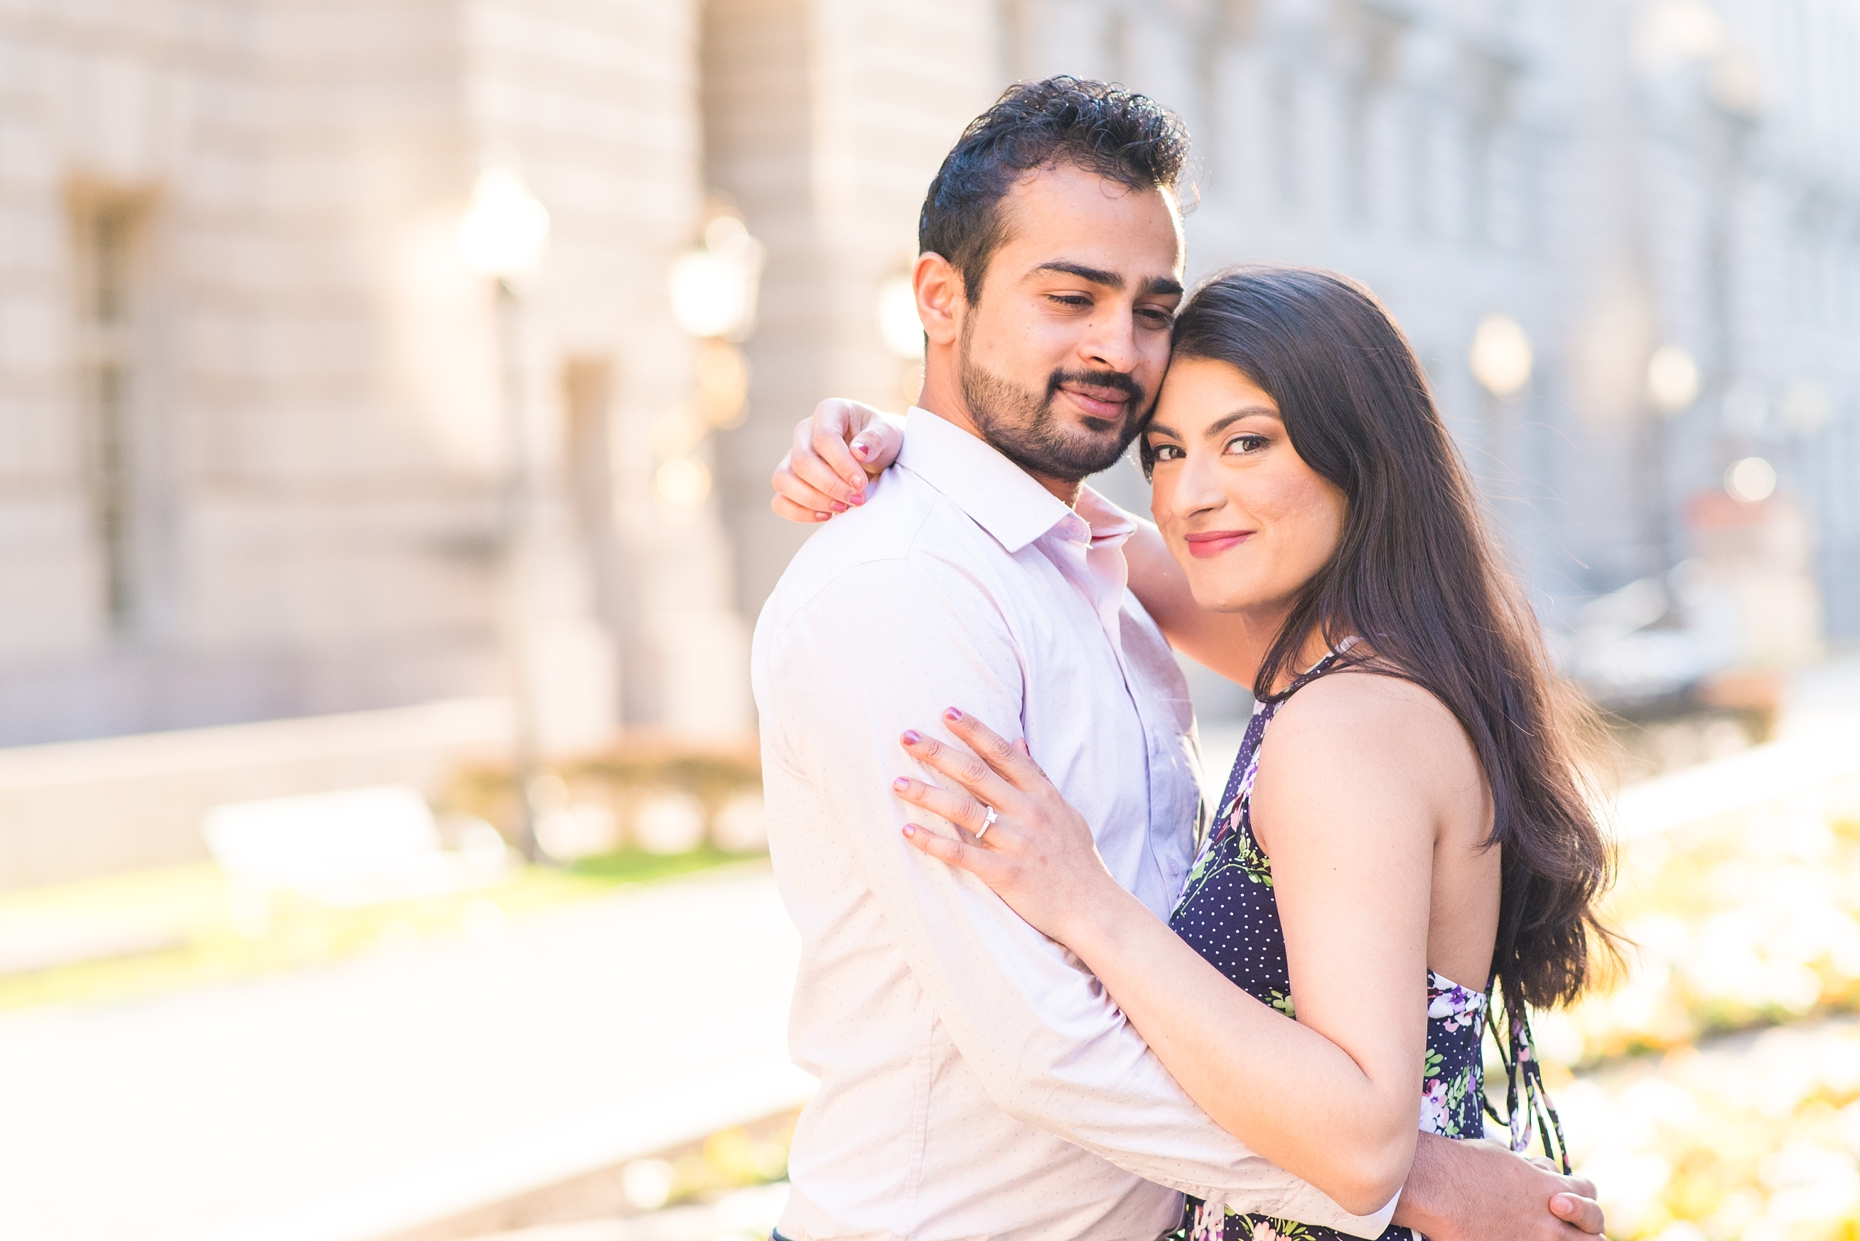 CapitolHillDCEngagementSessionPhotography-ManaliPhotography-011